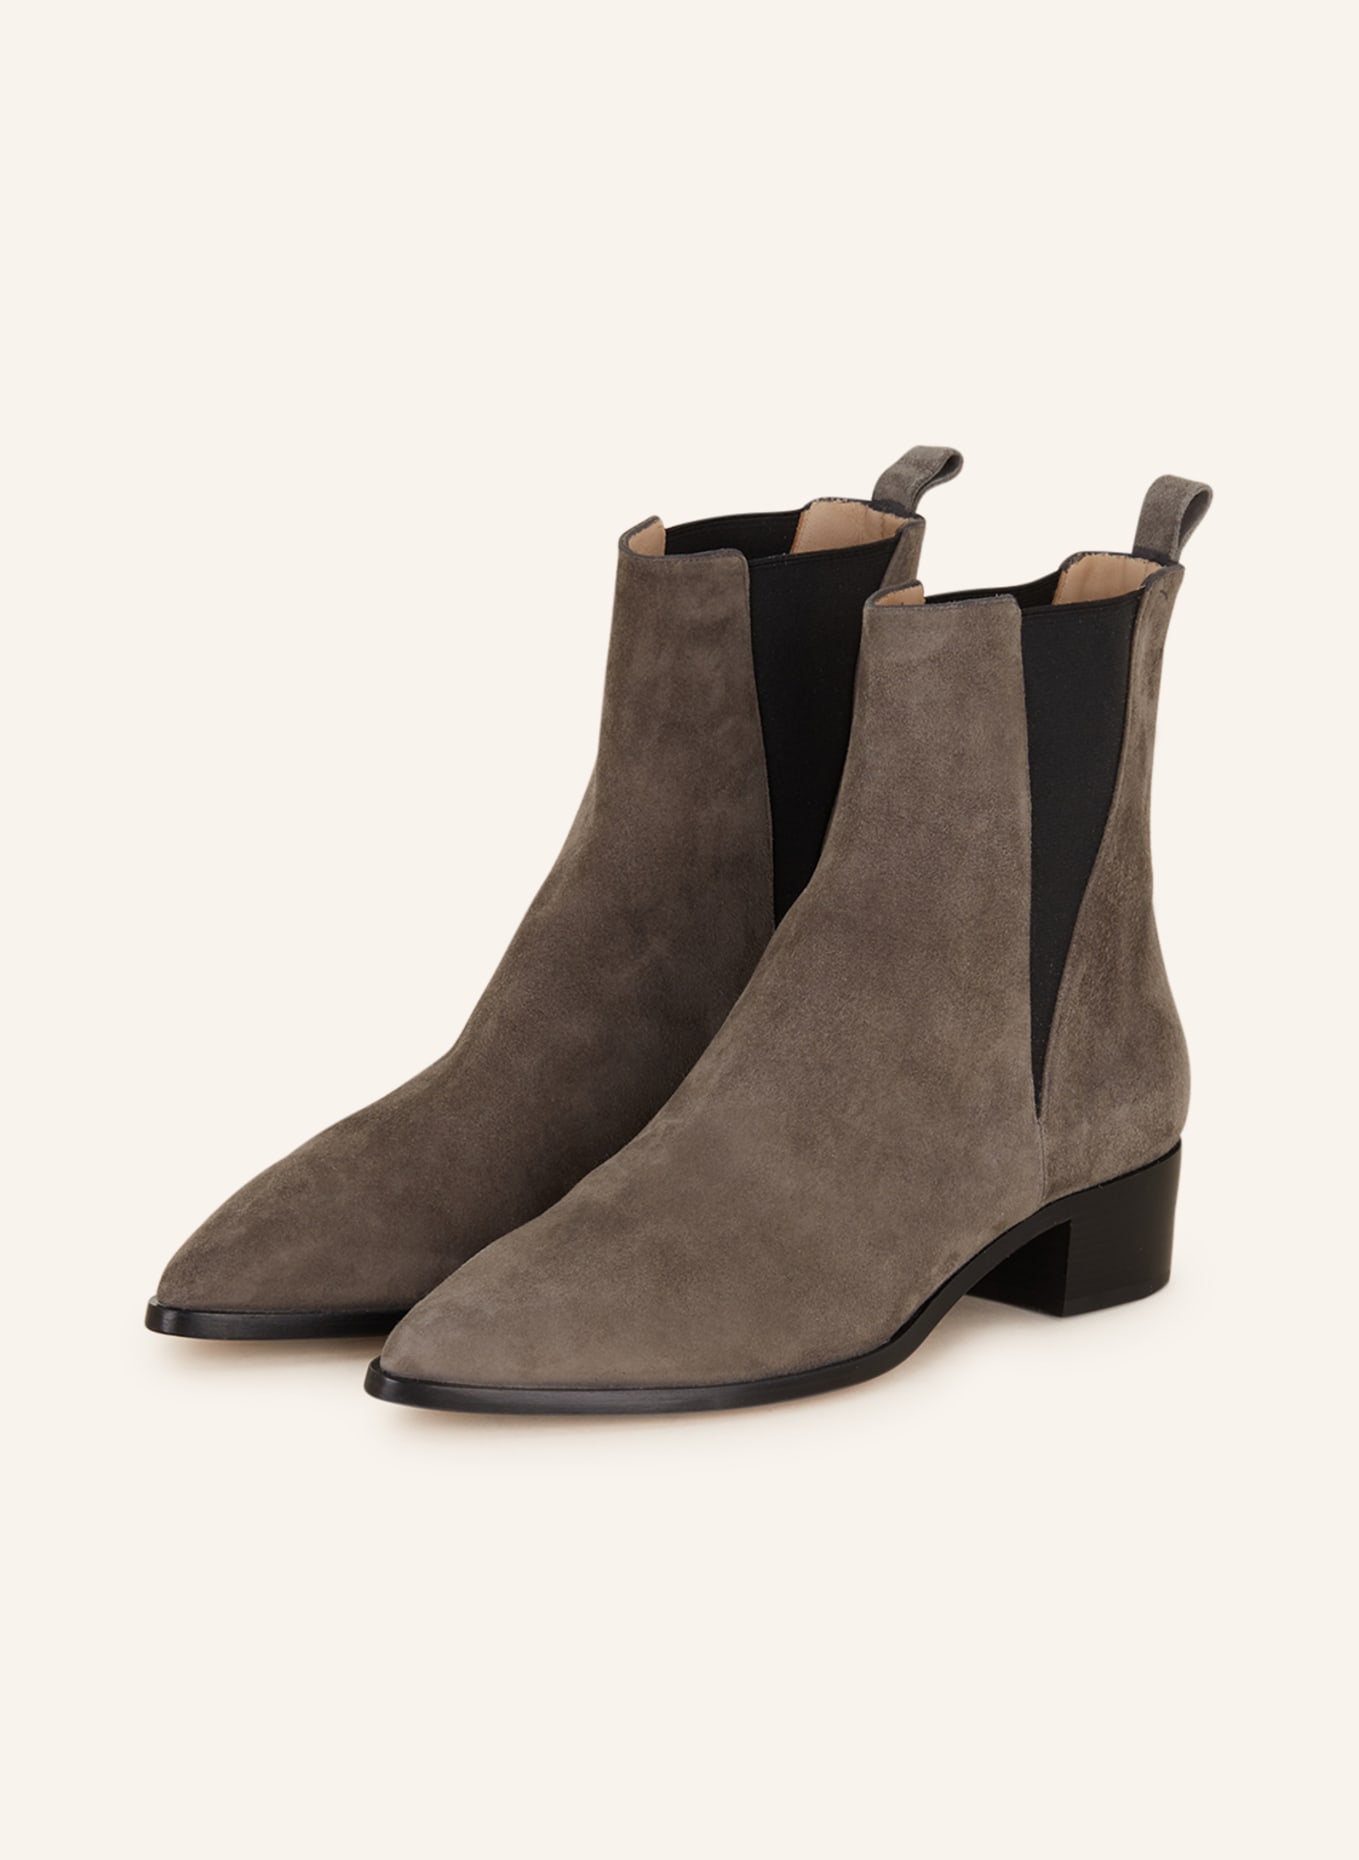 POMME D'OR Chelsea-Boots SIBYL, Farbe: TAUPE/ SCHWARZ (Bild 1)